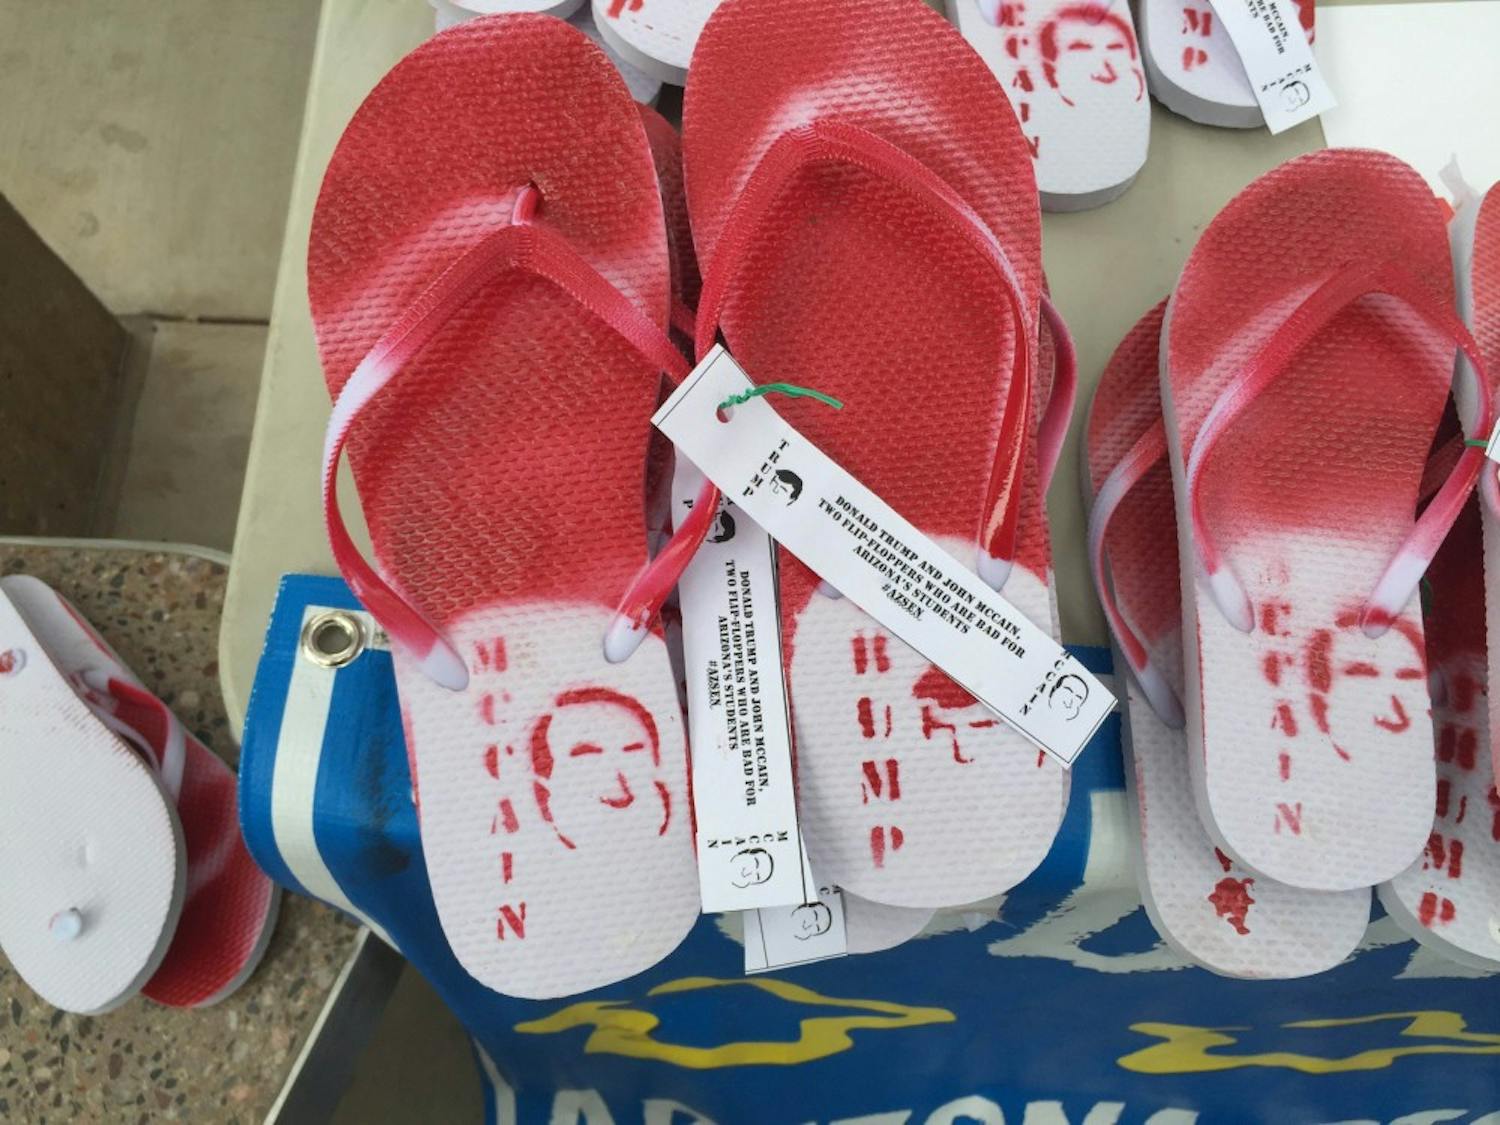 ASU Young Democrats handed out&nbsp;flip-flops to ASU students&nbsp;which called out&nbsp;U.S. Sen. John McCain (R-AZ) and GOP presidential nominee Donald Trump for being "flip-floppers" on their political views regarding education&nbsp;on Wednesday, Sept. 7, 2016.